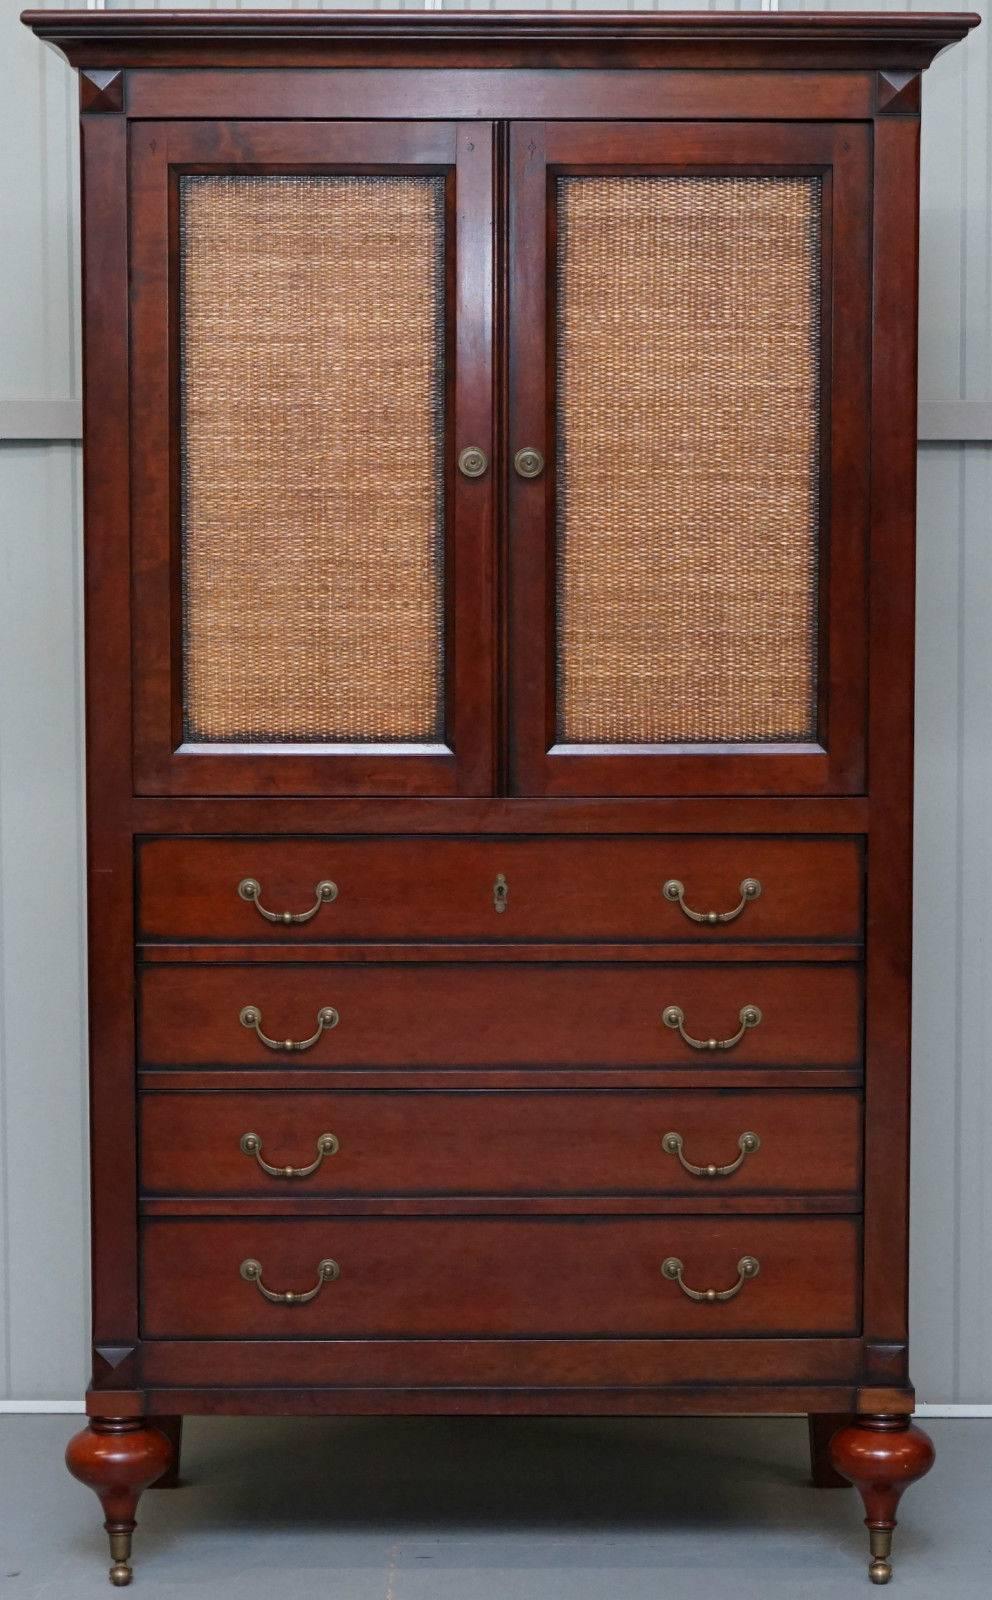 Antique & Vintage furniture Wimbledon

We are delighted to offer for sale this lovely very rare Grange Louis Phillippe Cheery Wood RRP £7000 television entertainment cabinet

Please note the delivery fee listed is just a guide, for an accurate quote